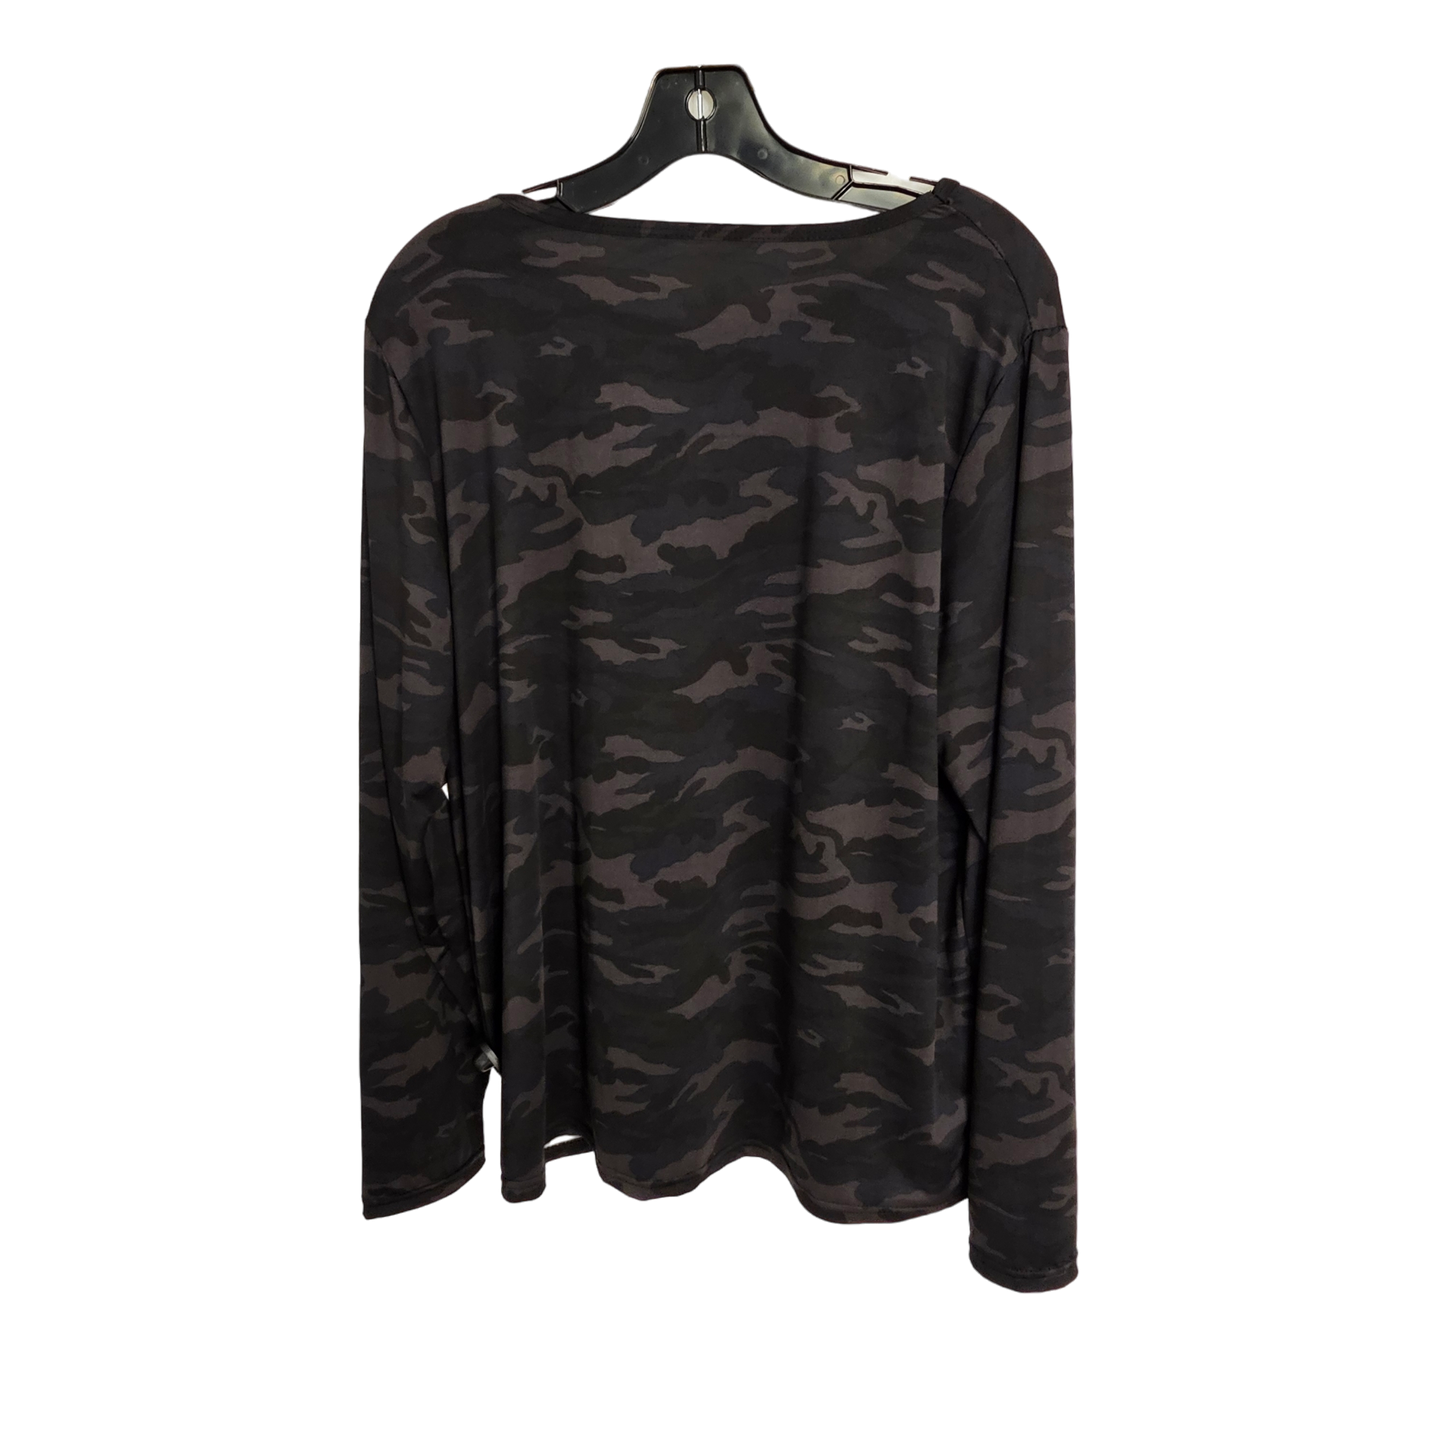 Top Long Sleeve By realessentials  Size: Xl